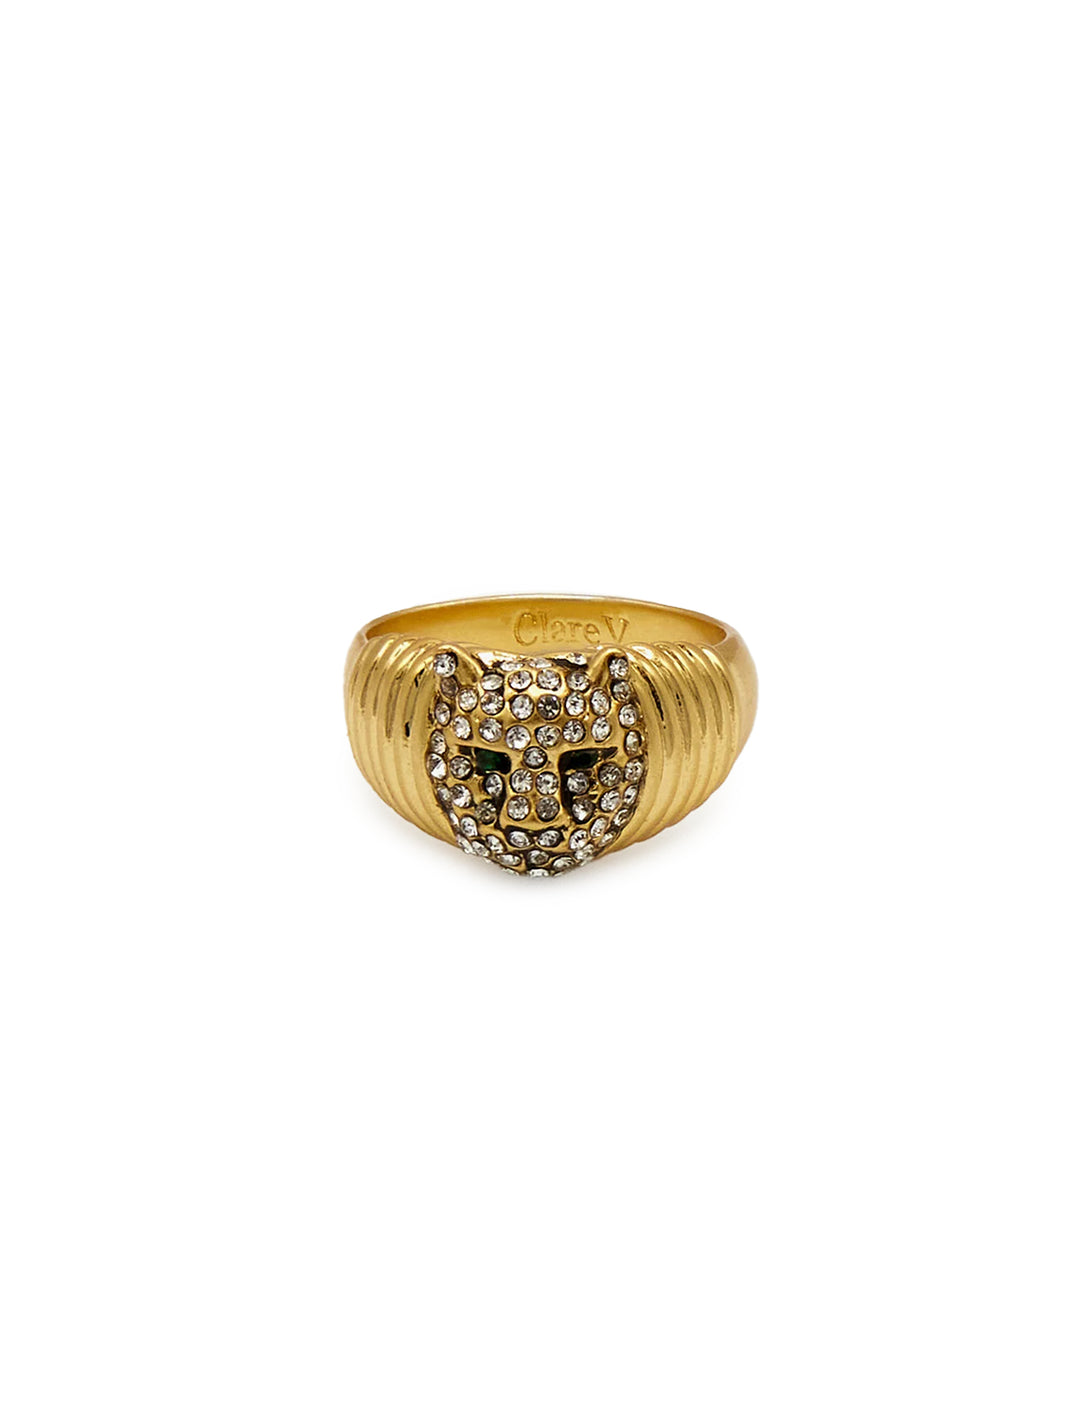 Front view of Clare V.'s whiskers signet ring.